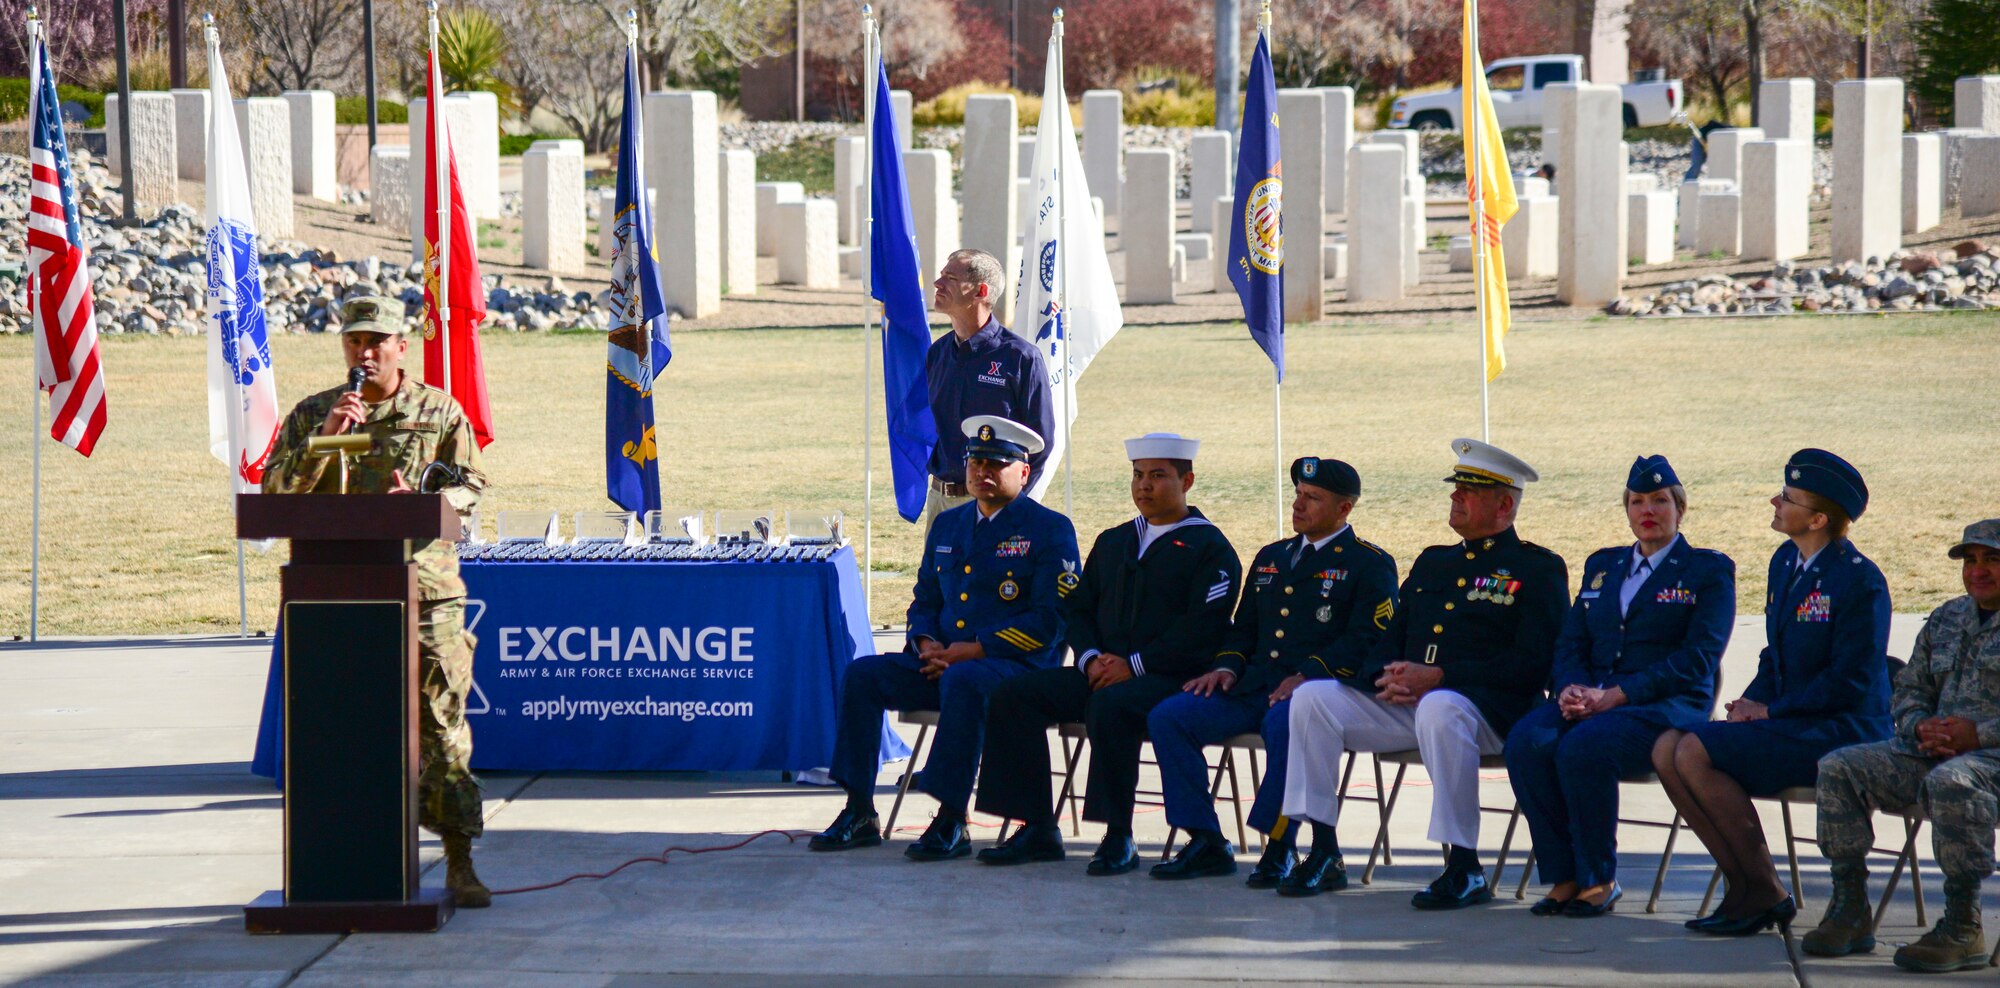 Col. Juan Alvarez, 377th Mission Support Group Commander, speaks during a ceremony to commemorate Vietnam Veterans Day at the New Mexico Veterans Memorial, March 29, 2019. Various organizations from Kirtland Air Force Base, including the Defense Commissary Agency and the Army and Air Force Exchange Service worked together to make the ceremony special for the state's Vietnam veterans. (U.S. Air Force photo by Jessie Perkins)